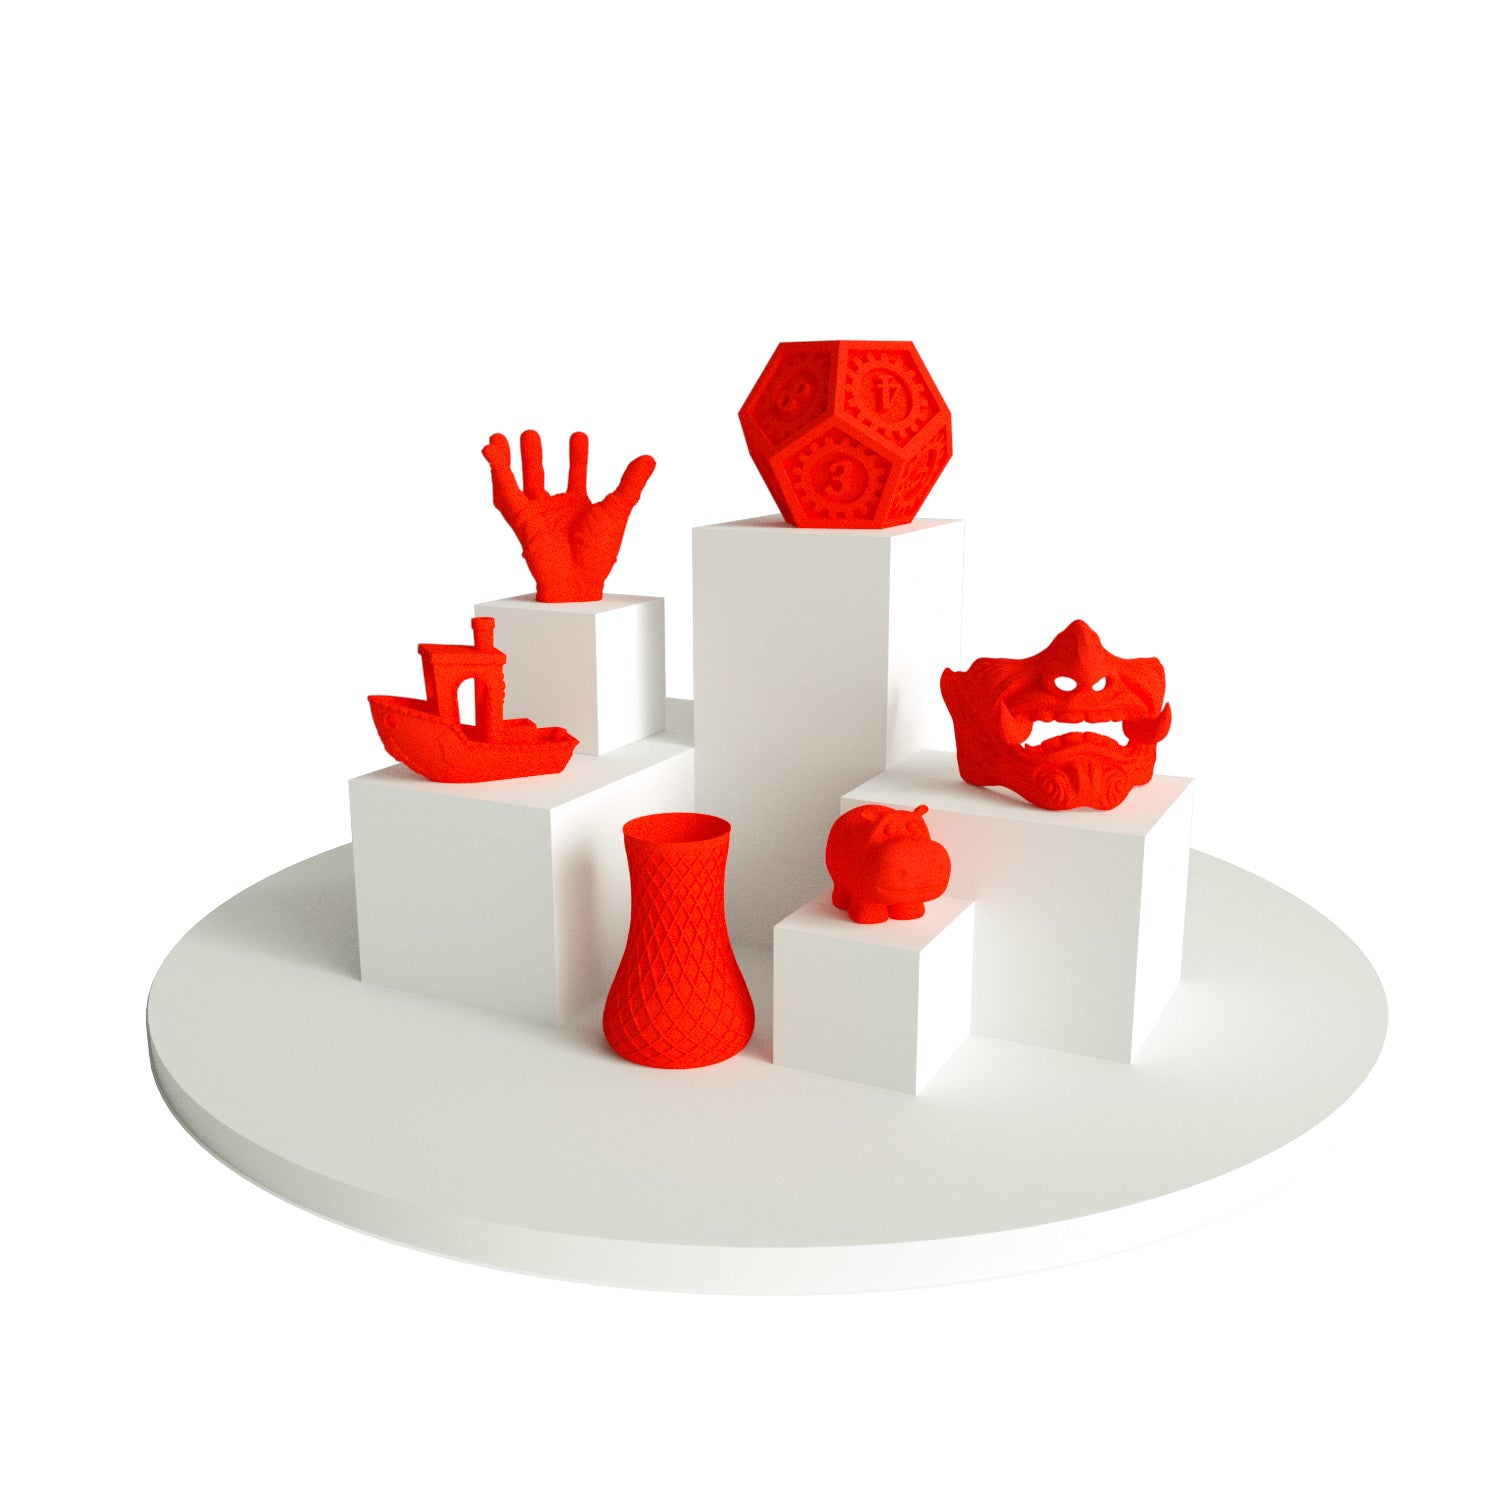 Gallery of 3D printed models with red PLA Matte 